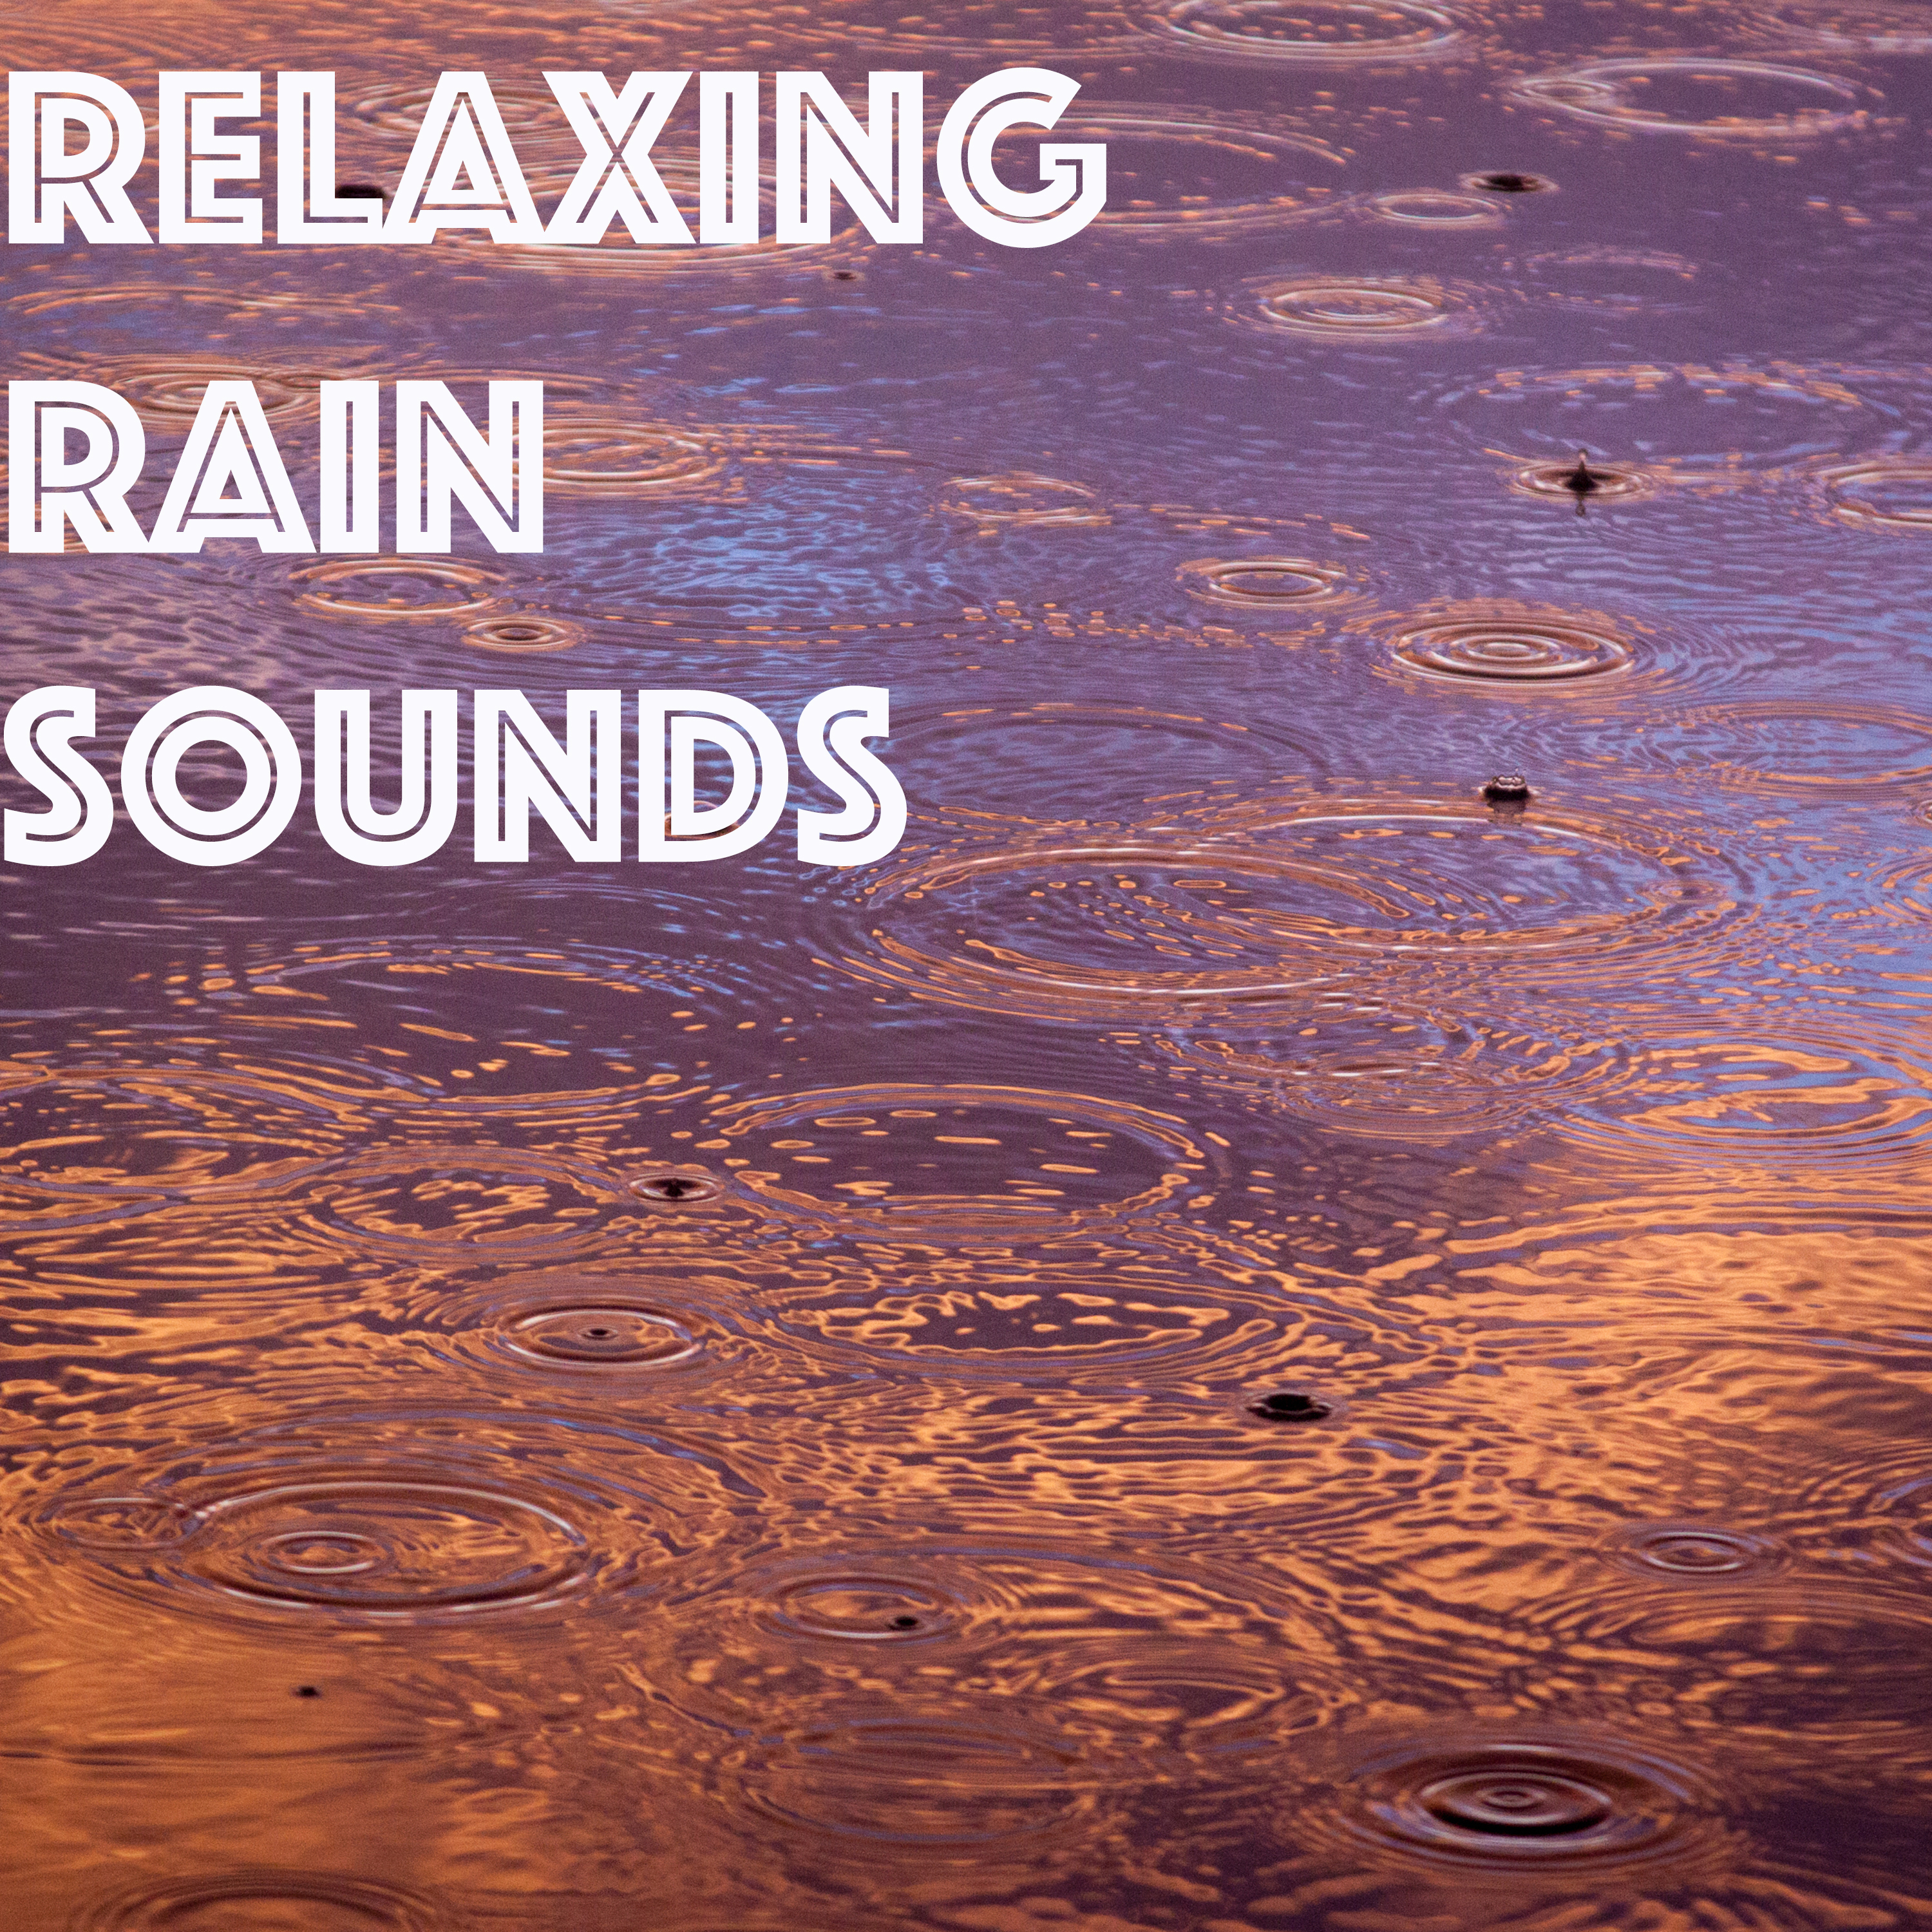 15 Soothing, Relaxing Rain Sounds